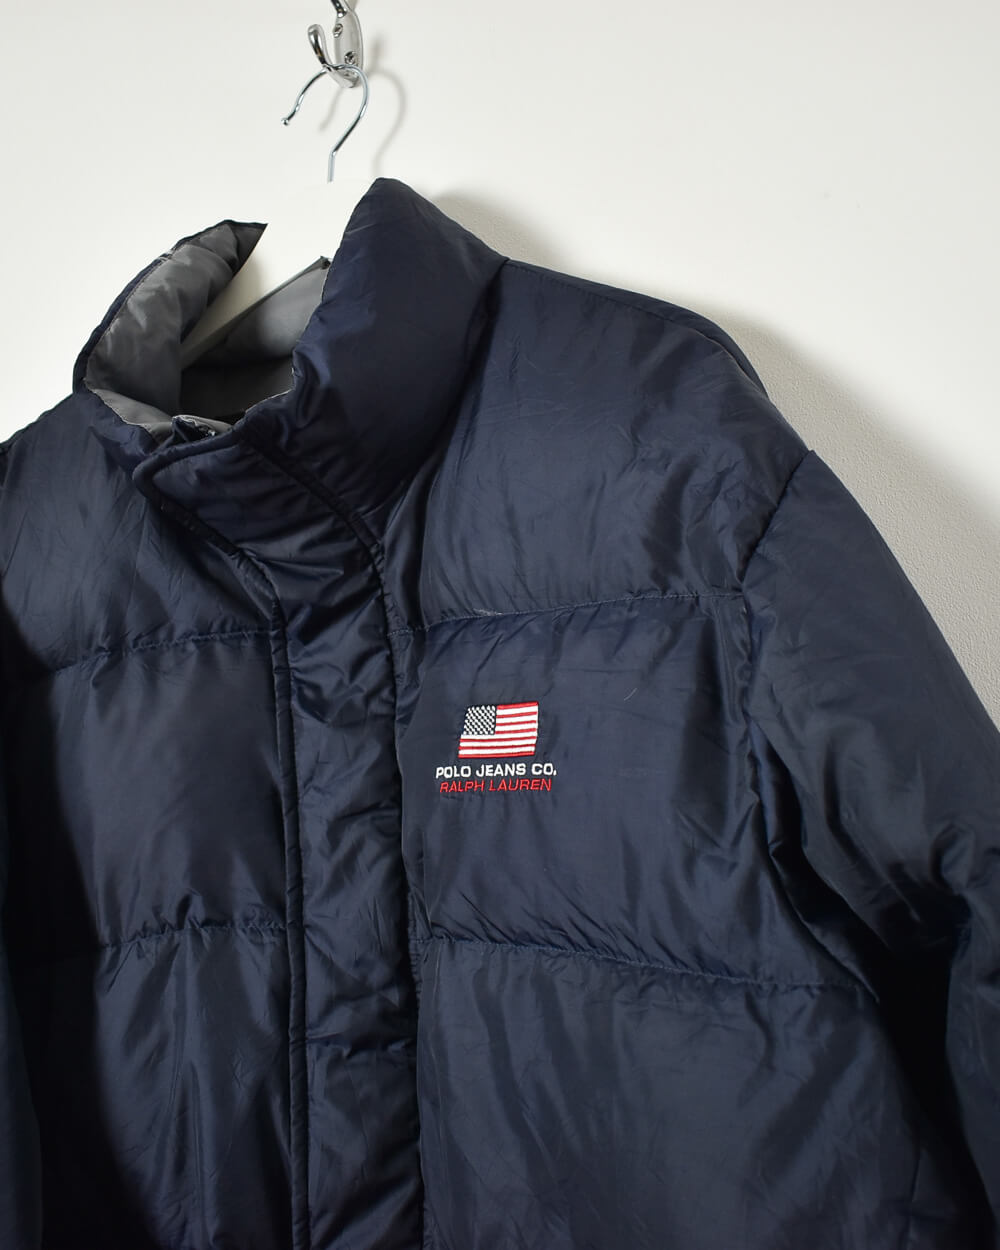 Navy Ralph Lauren Polo Jeans Co Puffer Jacket - X-Large